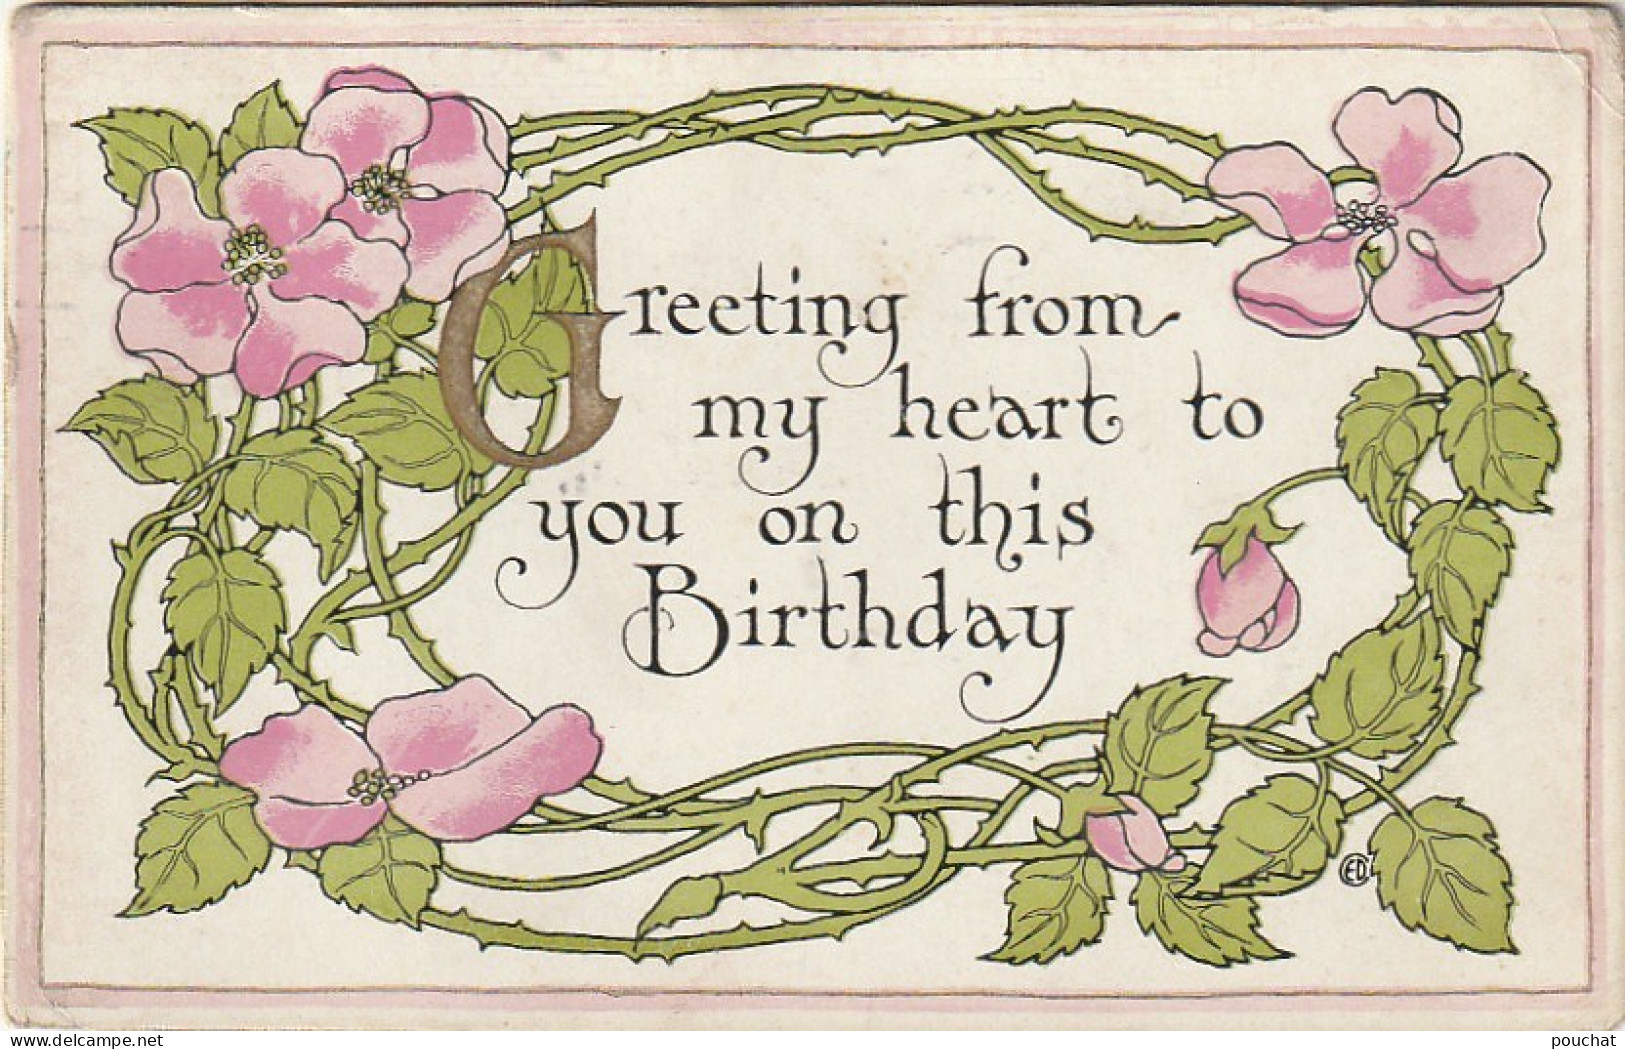 Z+ 6- " GREETING .. TO YOU ON THIS BIRTHDAY " - CARTE ANNIVERSAIRE  FANTAISIE - TIGES DE ROSES ENCHEVETREES  - 2 SCANS - Compleanni